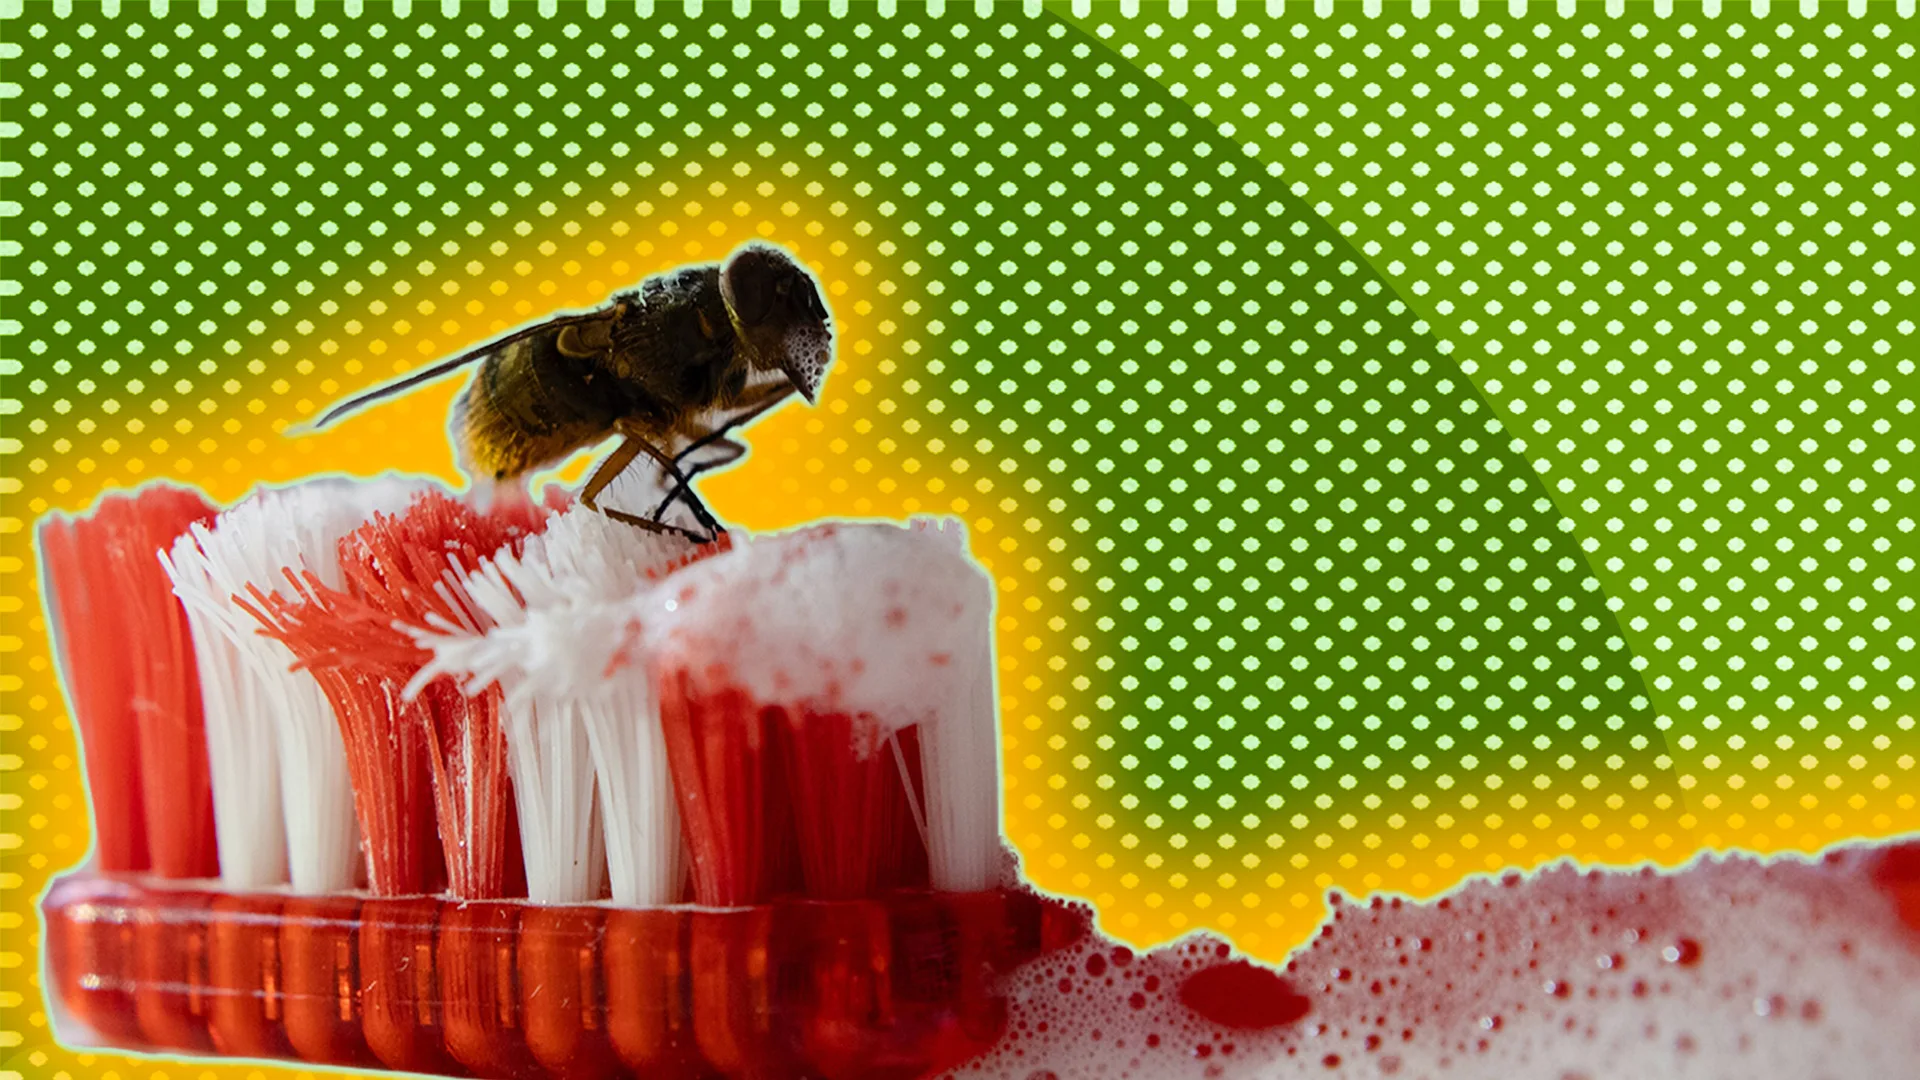 Bee on toothbrush with a polkadot background and a glow around the image